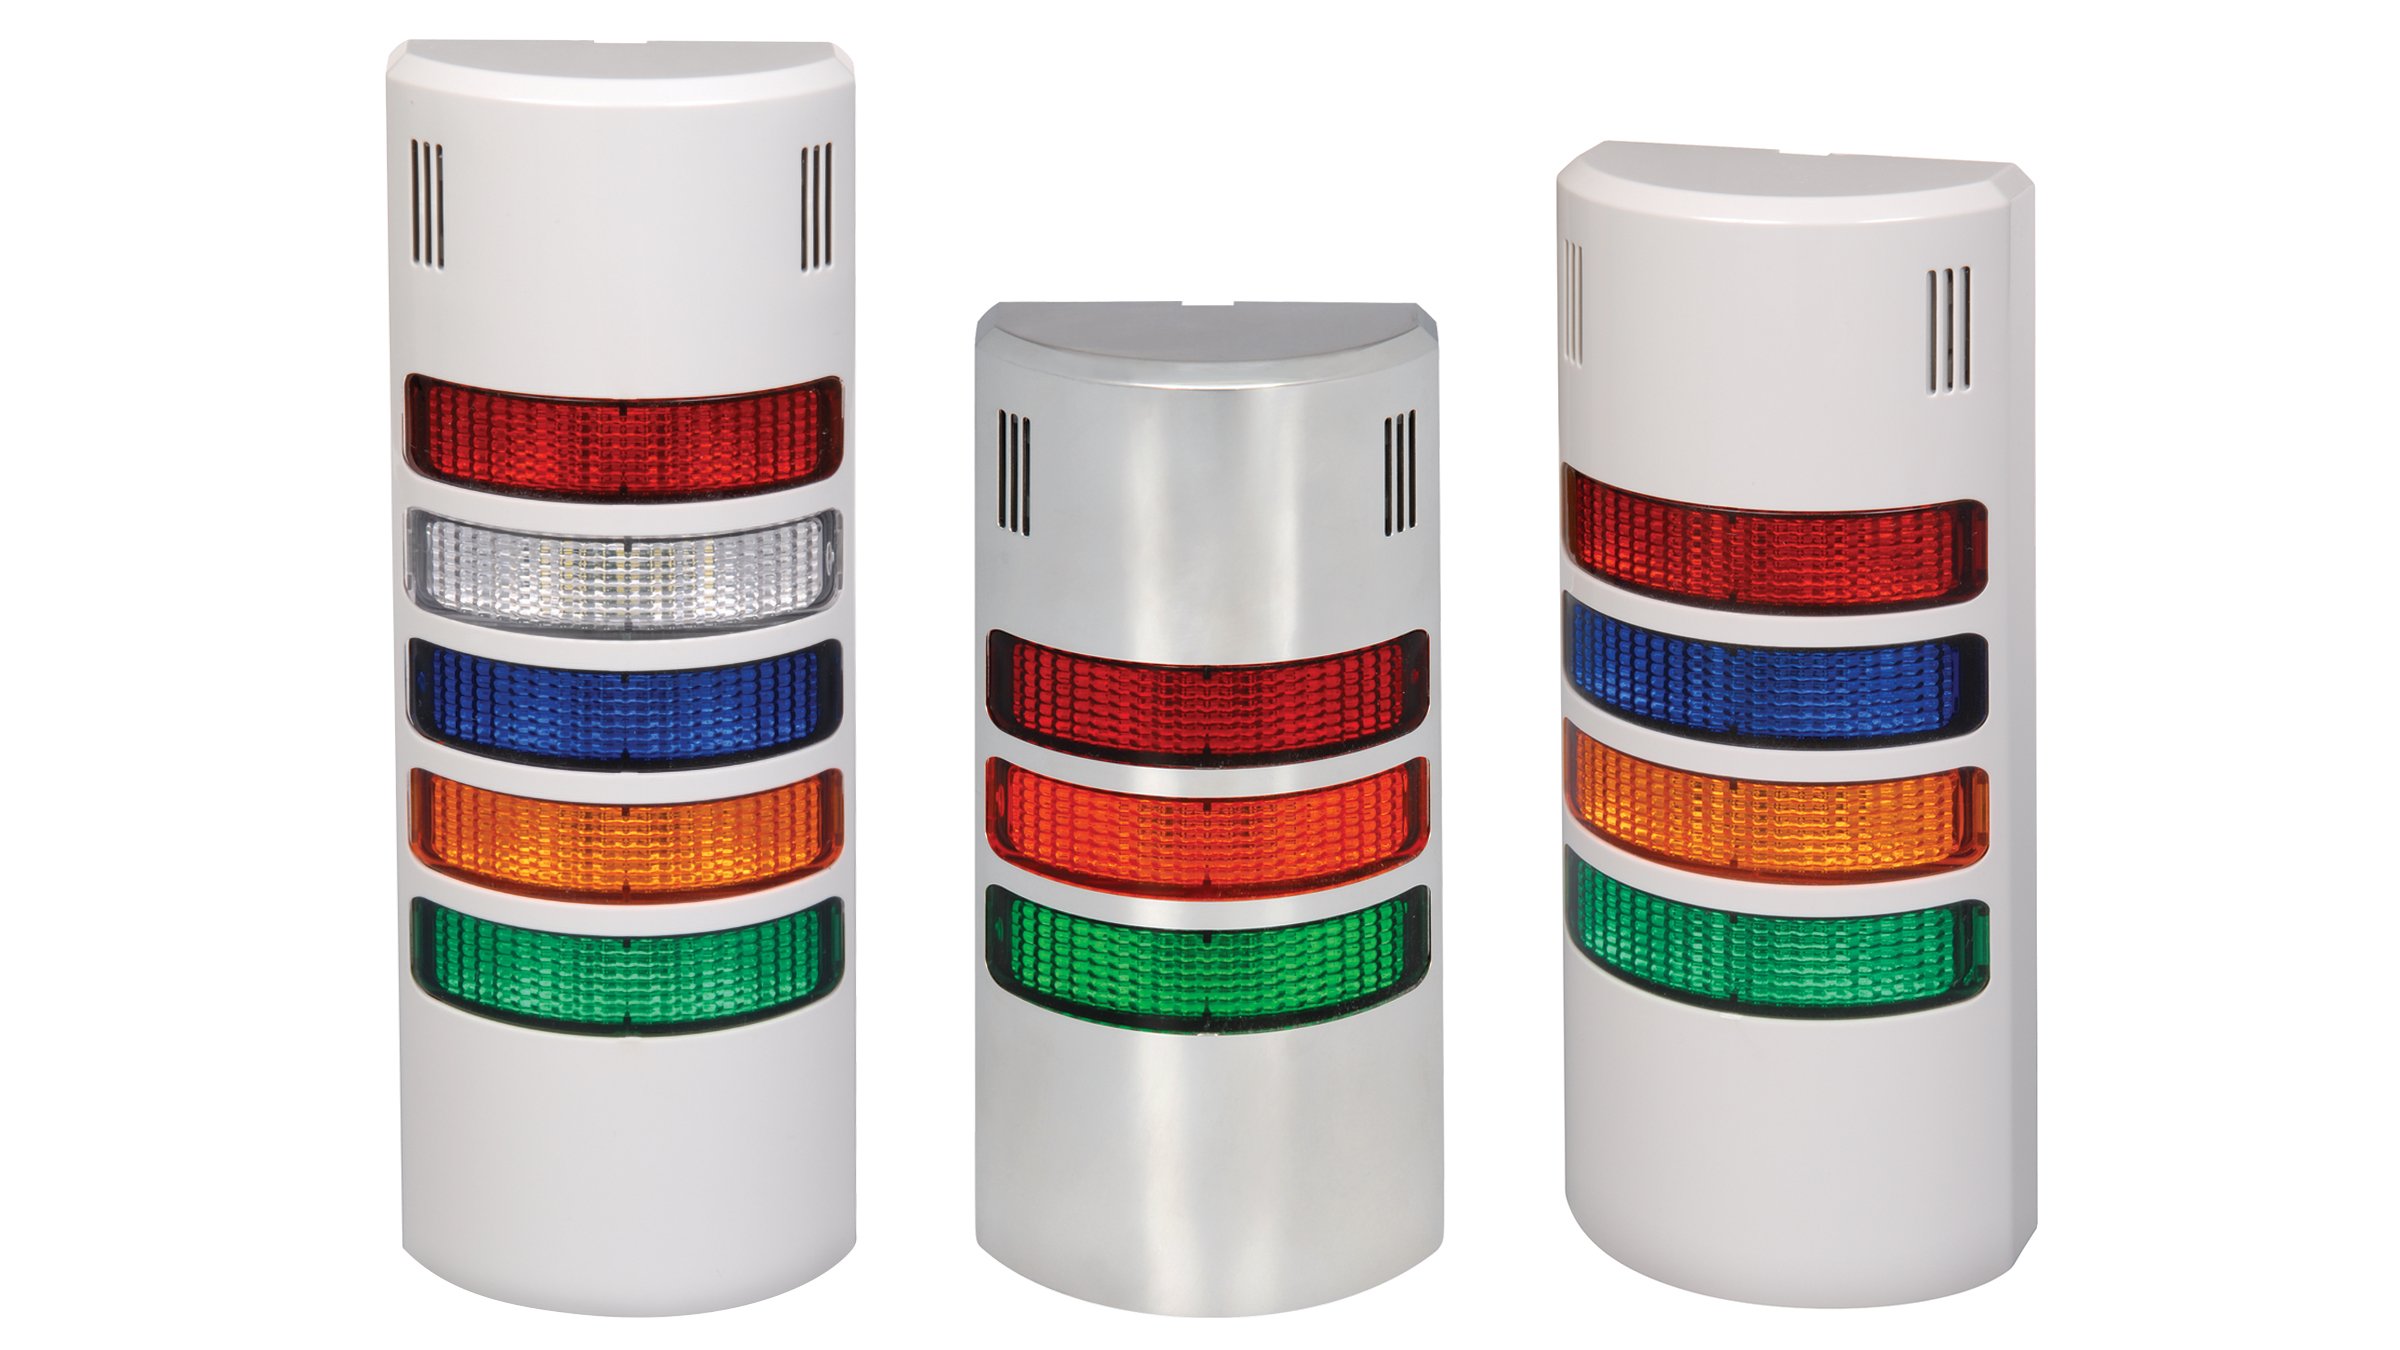 three versions of the 855 wall mount signal lights; one with red/white/blue/orange/green lights; one with red/orange/green; one with red/blue/orange/green